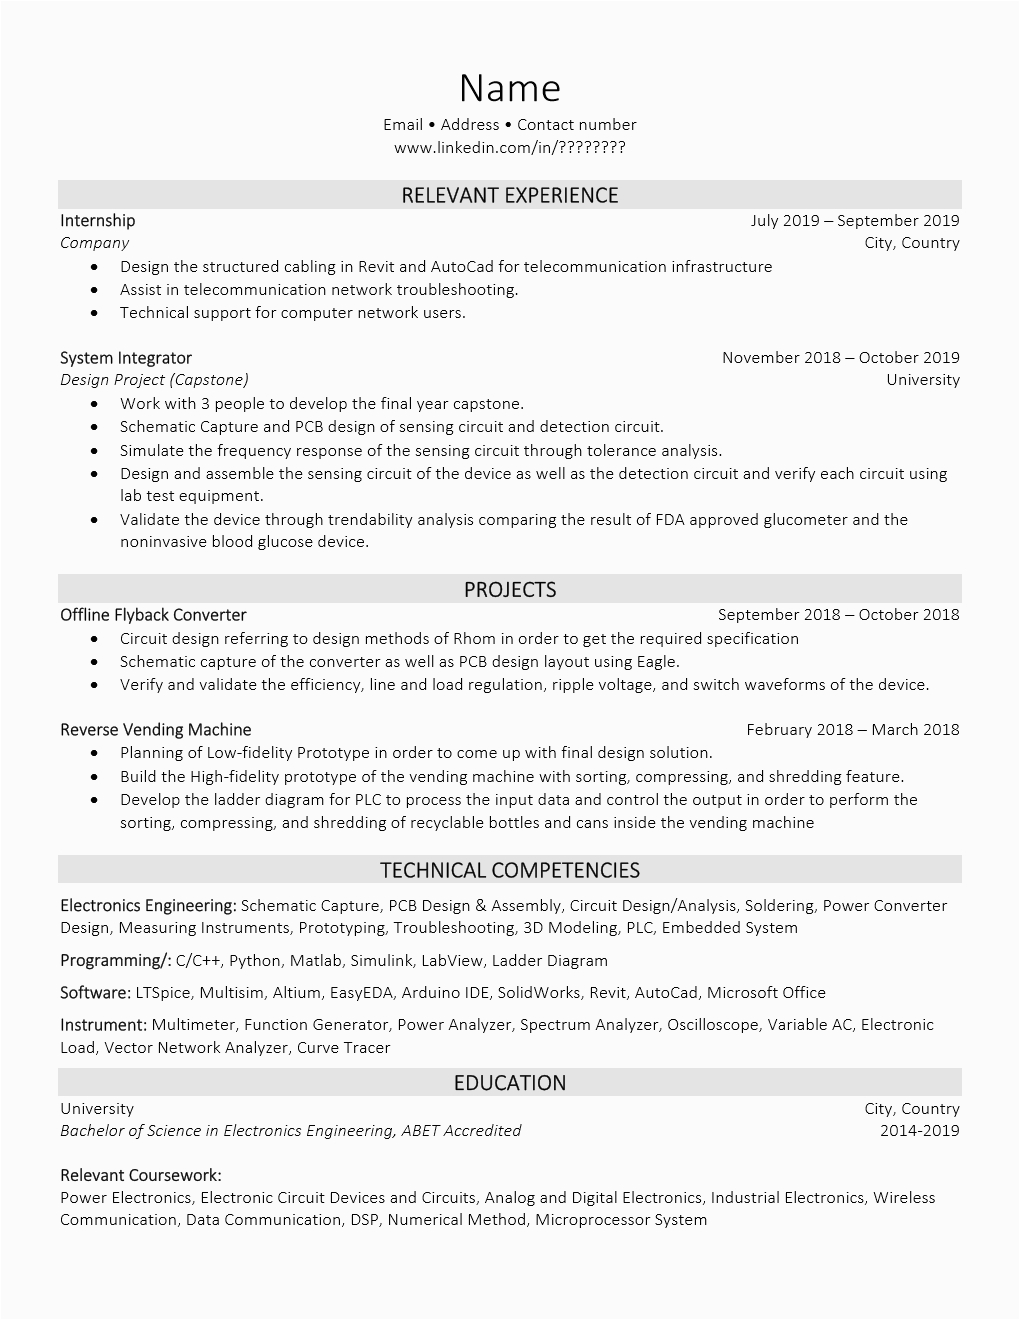 resume critique fresh graduate from other country